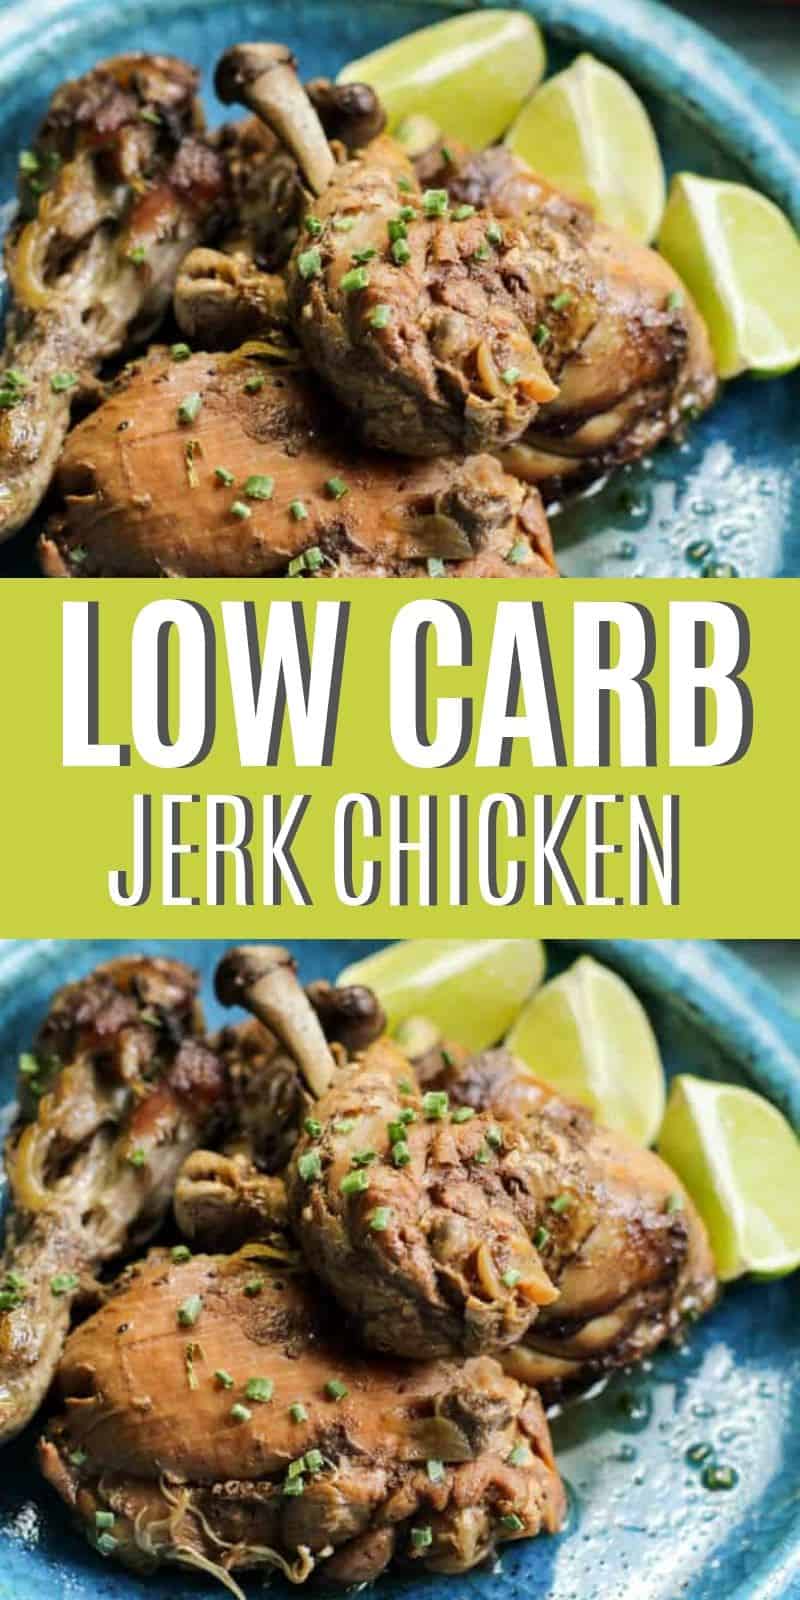 You are in for a treat today! This Low Carb Jerk Chicken Recipe is going to knock your socks off! My family has fallen in love with the flavors of this amazing chicken recipe. You definitely won't regret making this for dinner tonight!  